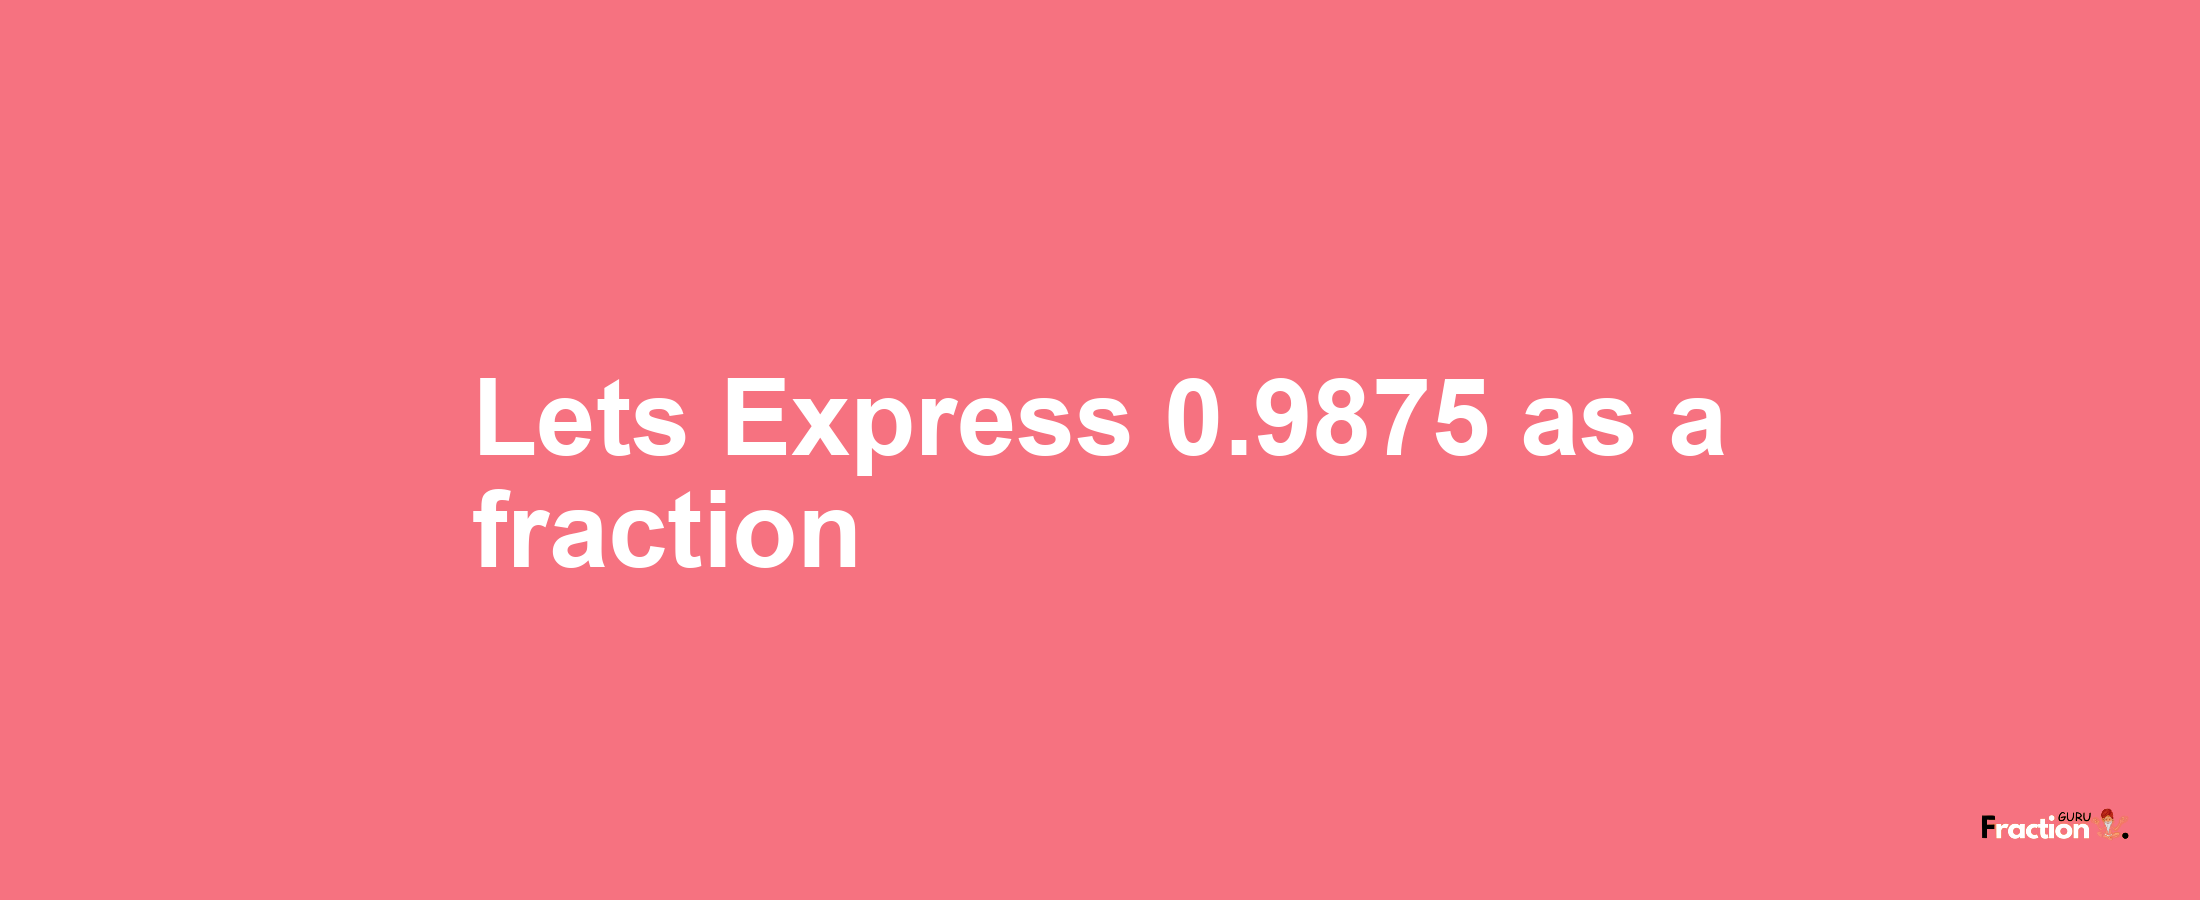 Lets Express 0.9875 as afraction